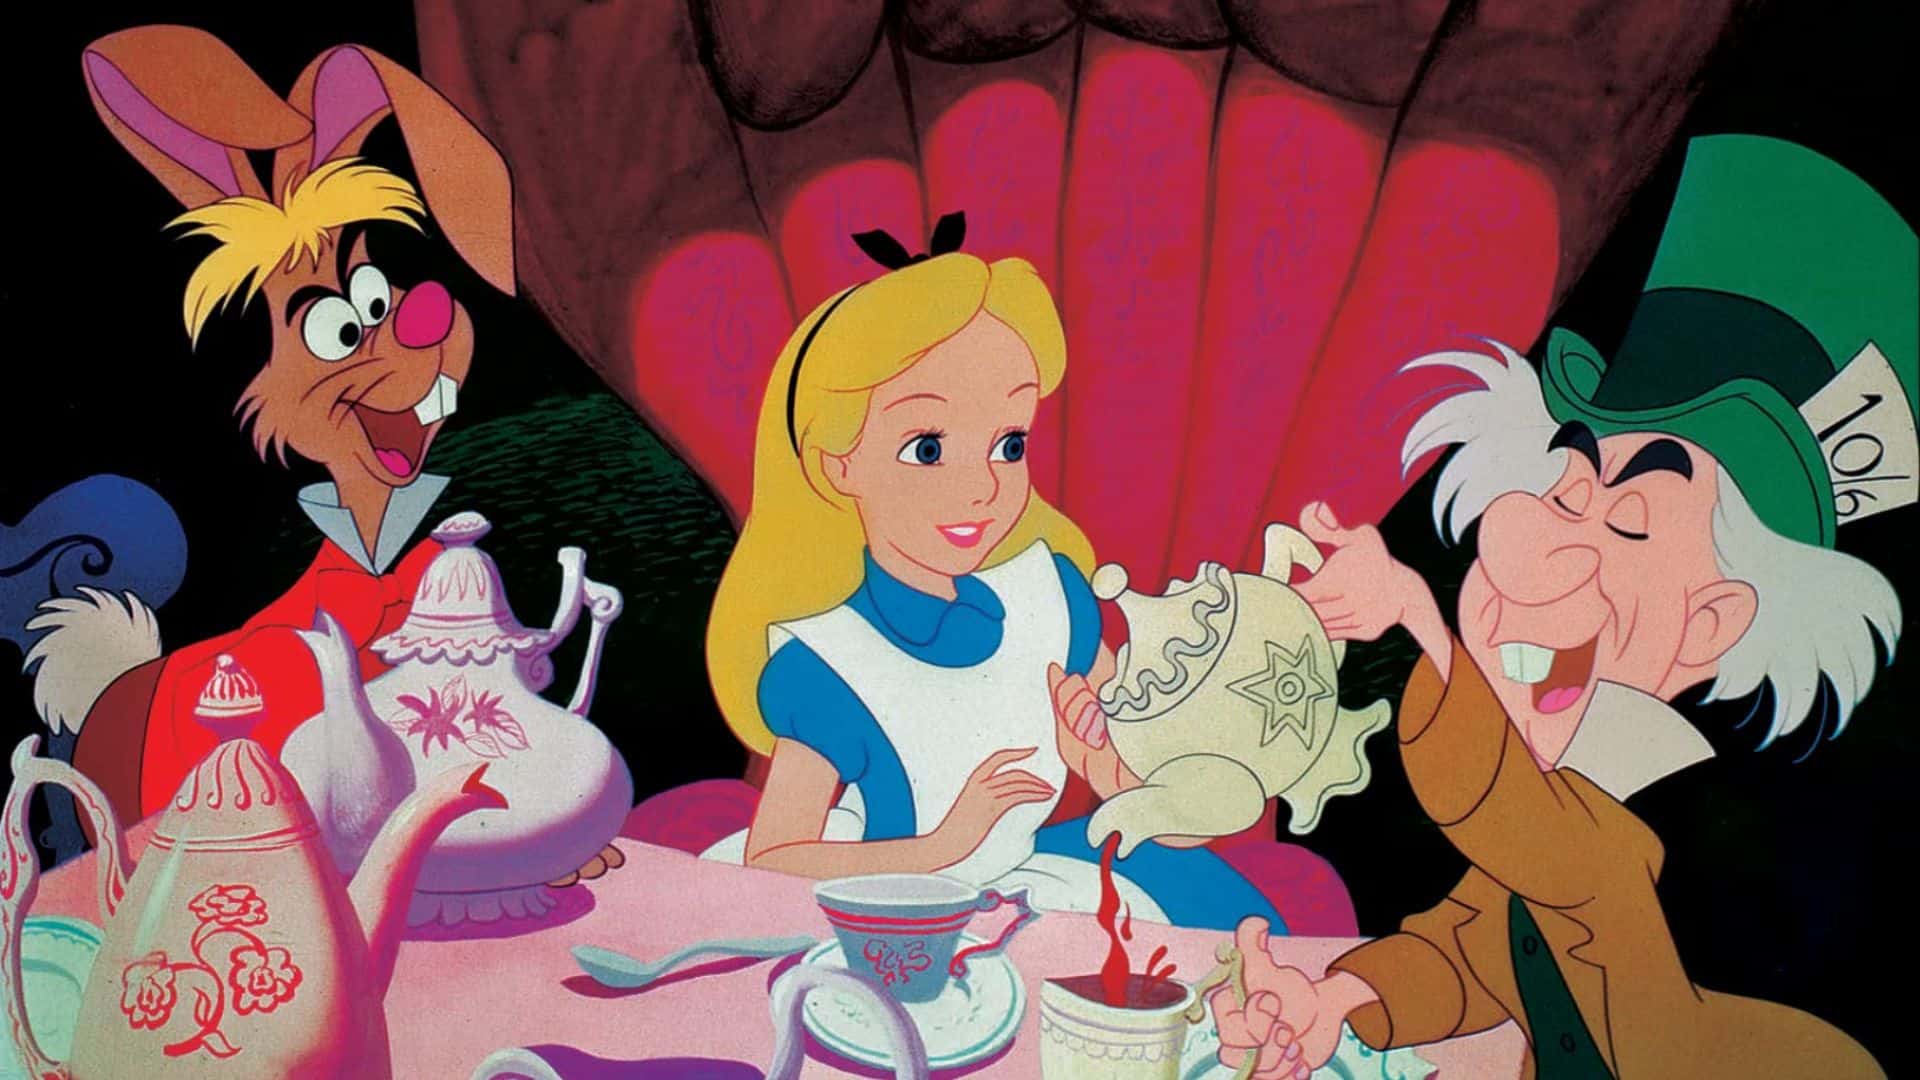 The March Hare, Alice, and the Mad Hatter enjoy a mad tea party in this image from Disney Plus.